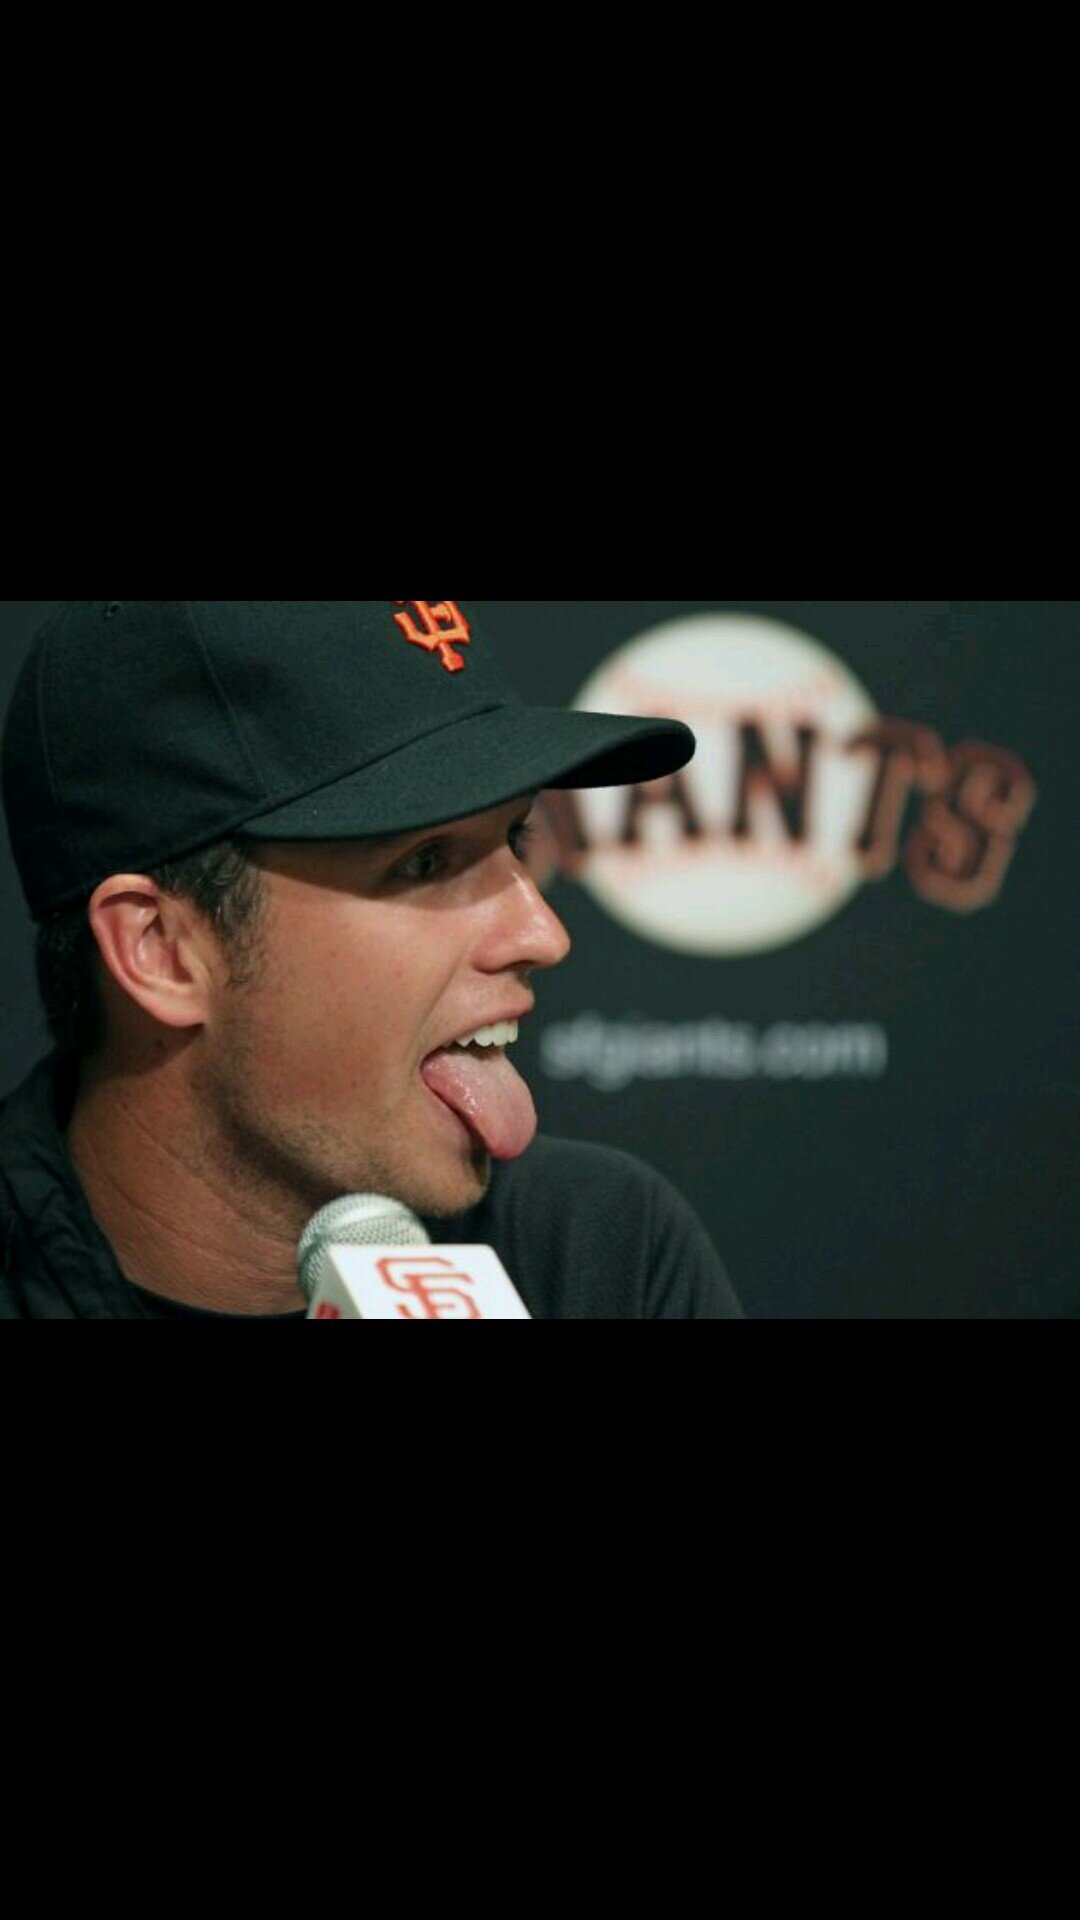 VOTE #BUSTERPOSEY #FACEOFMLB